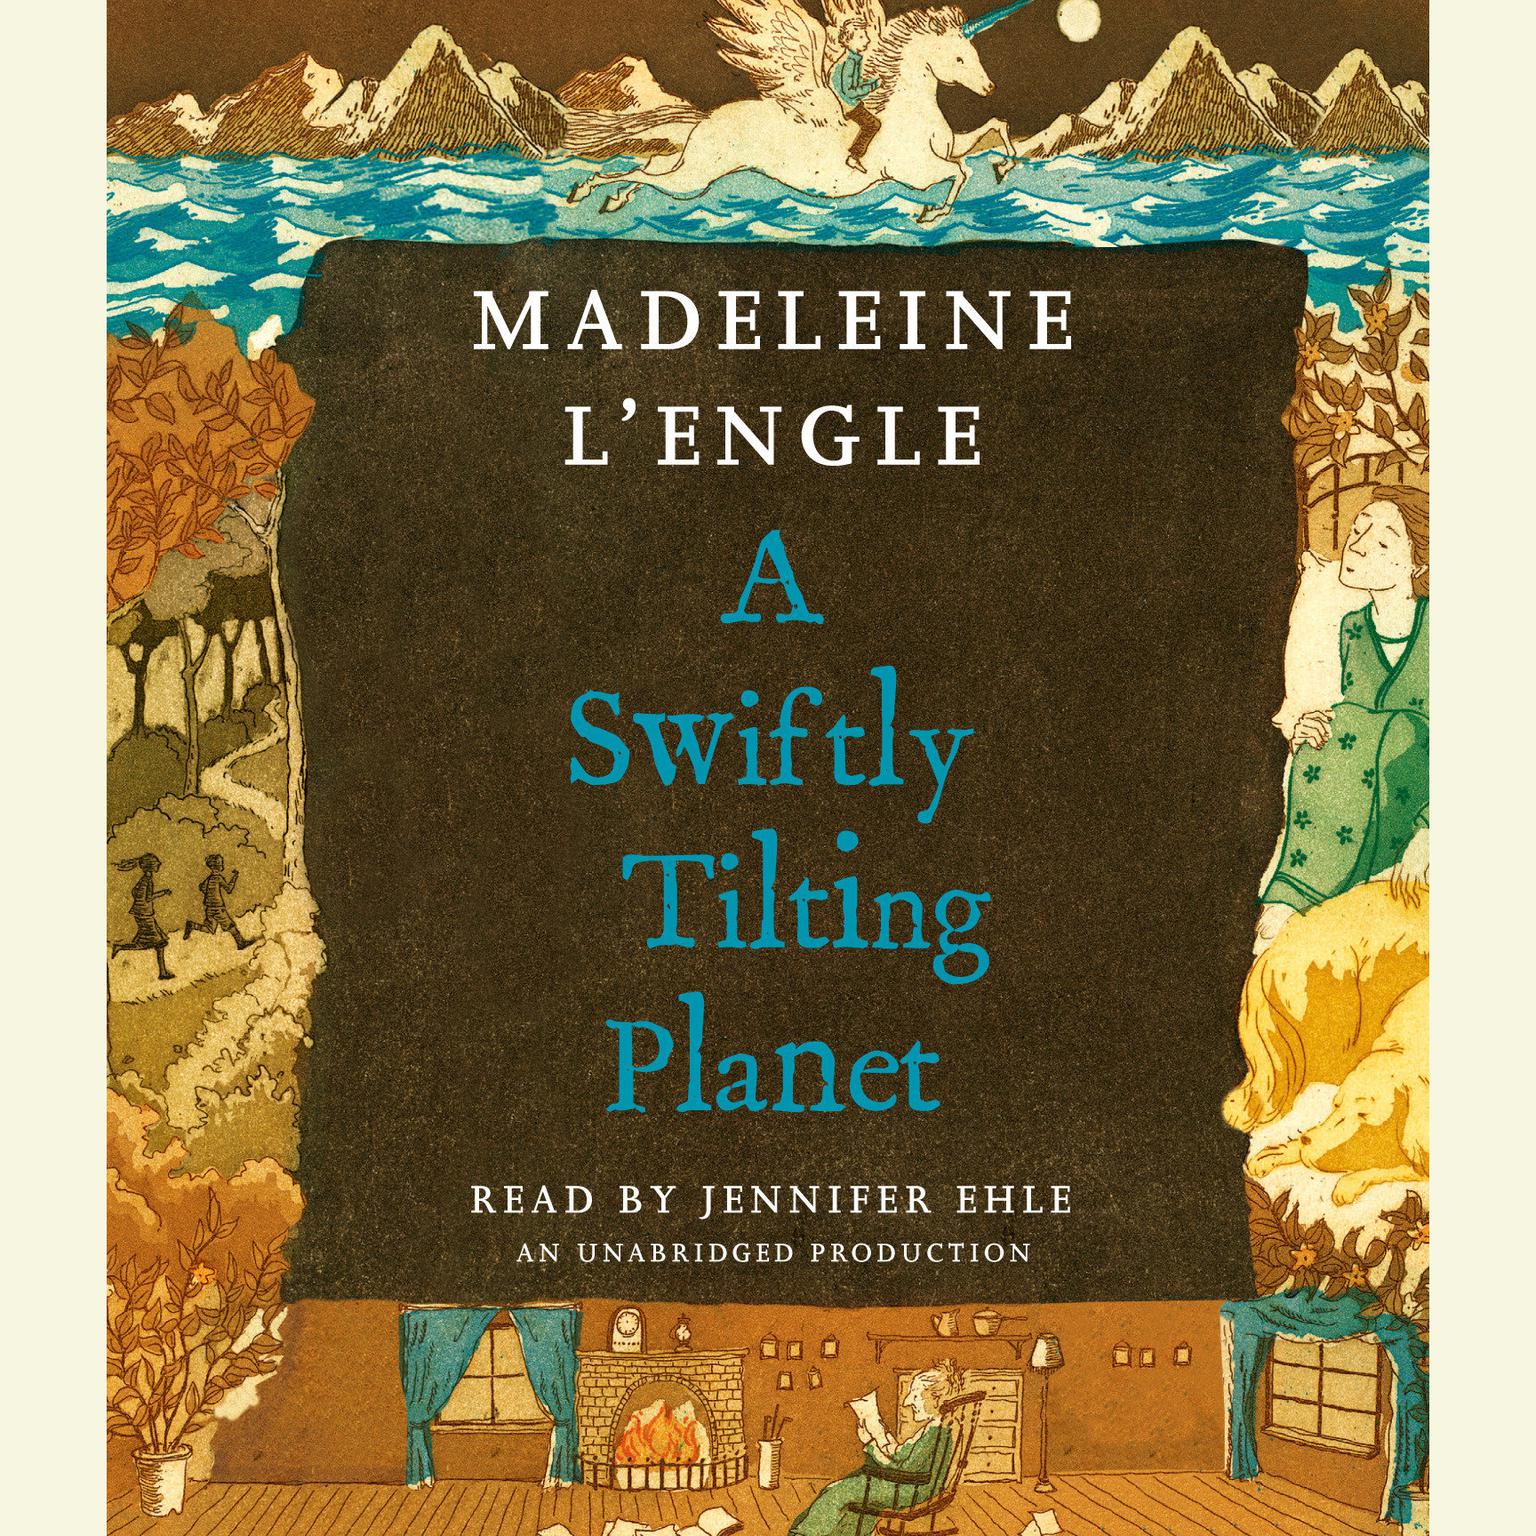 A Swiftly Tilting Planet Audiobook, by Madeleine L’Engle